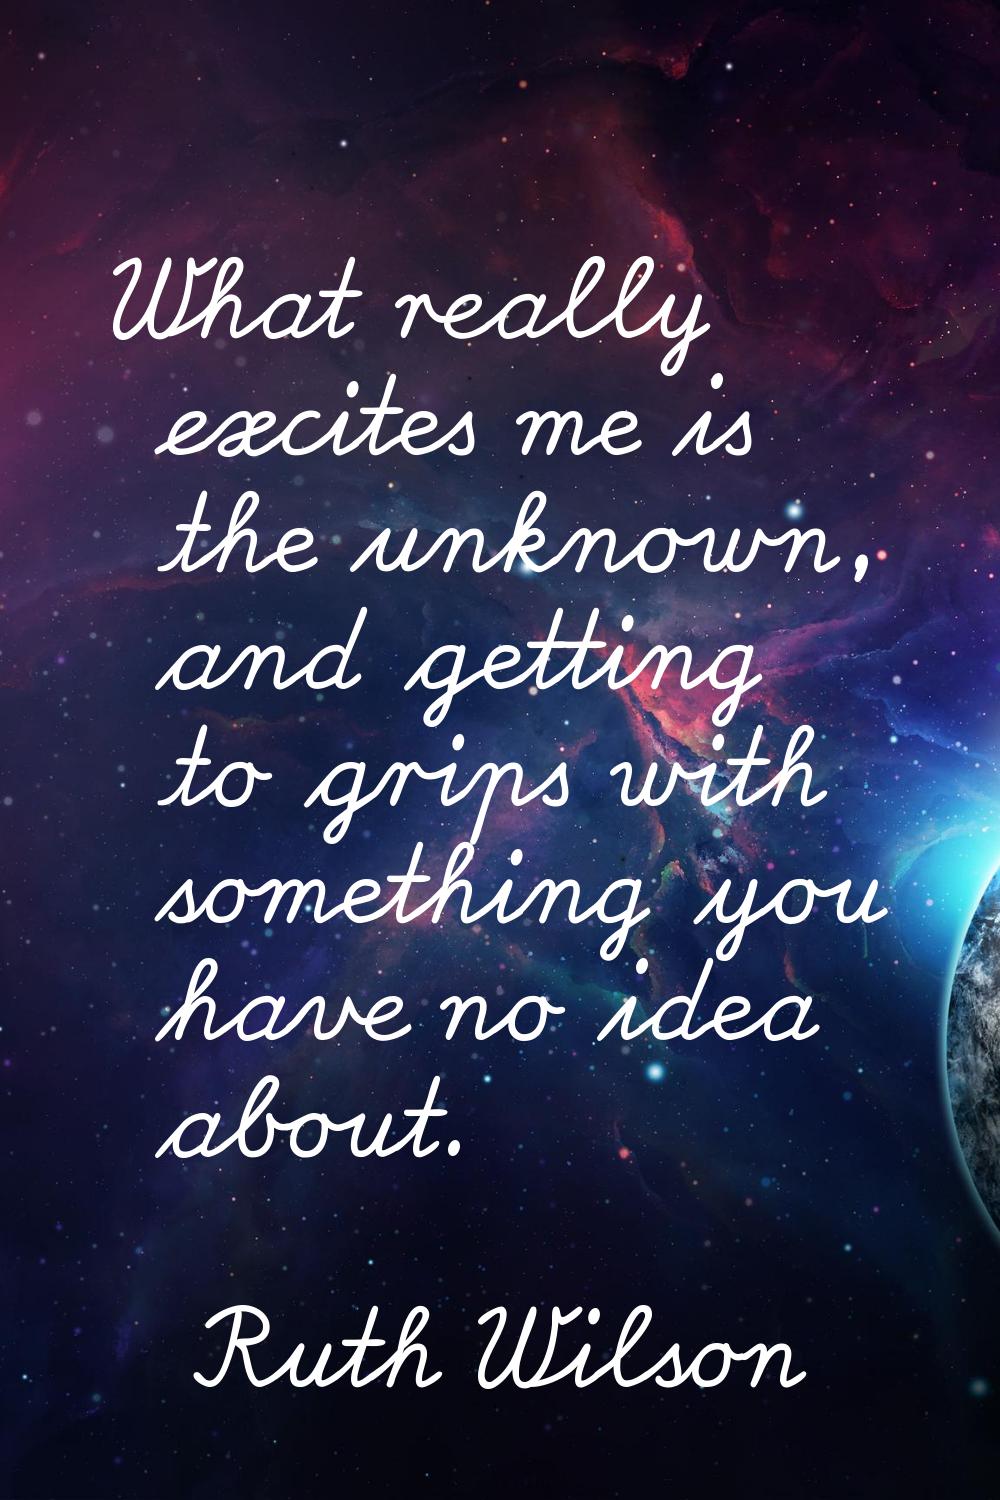 What really excites me is the unknown, and getting to grips with something you have no idea about.